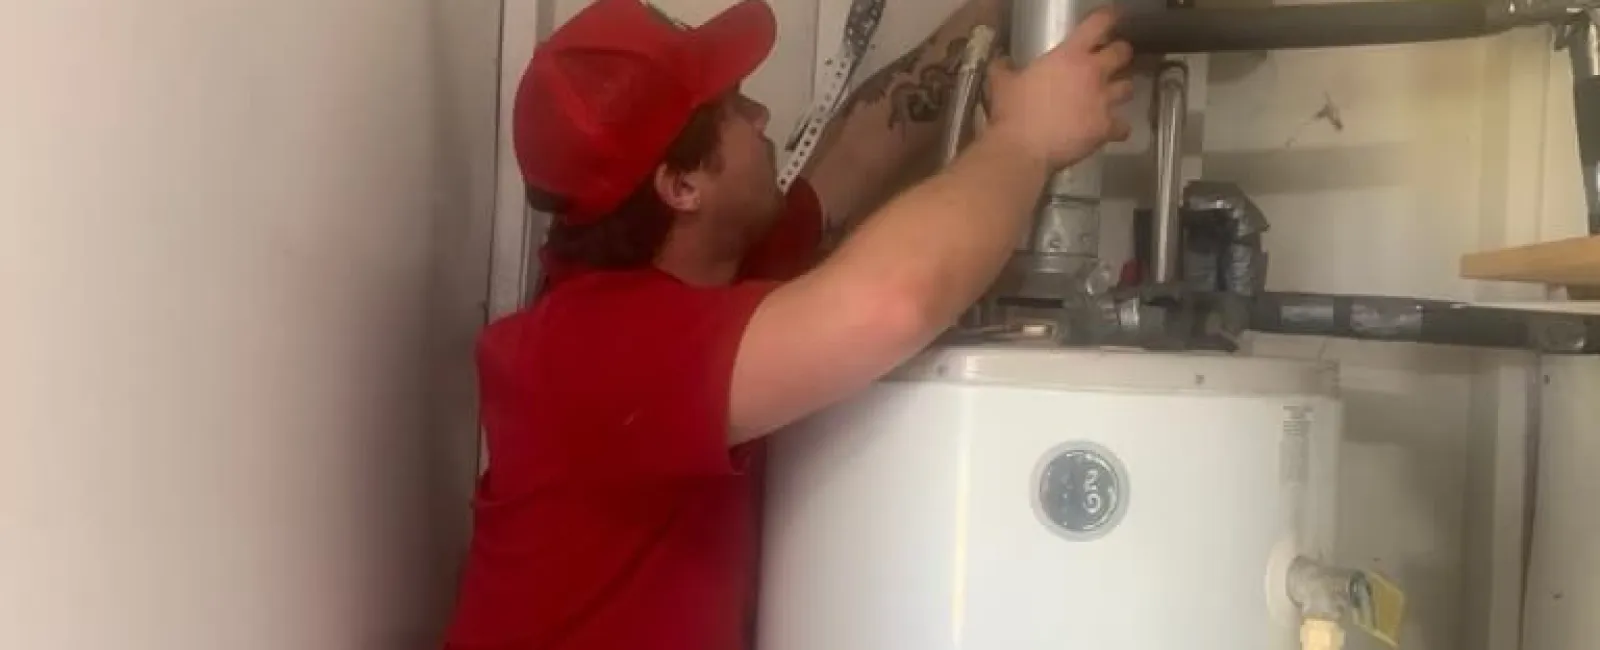 Signs Your Water Heater Needs to be Serviced